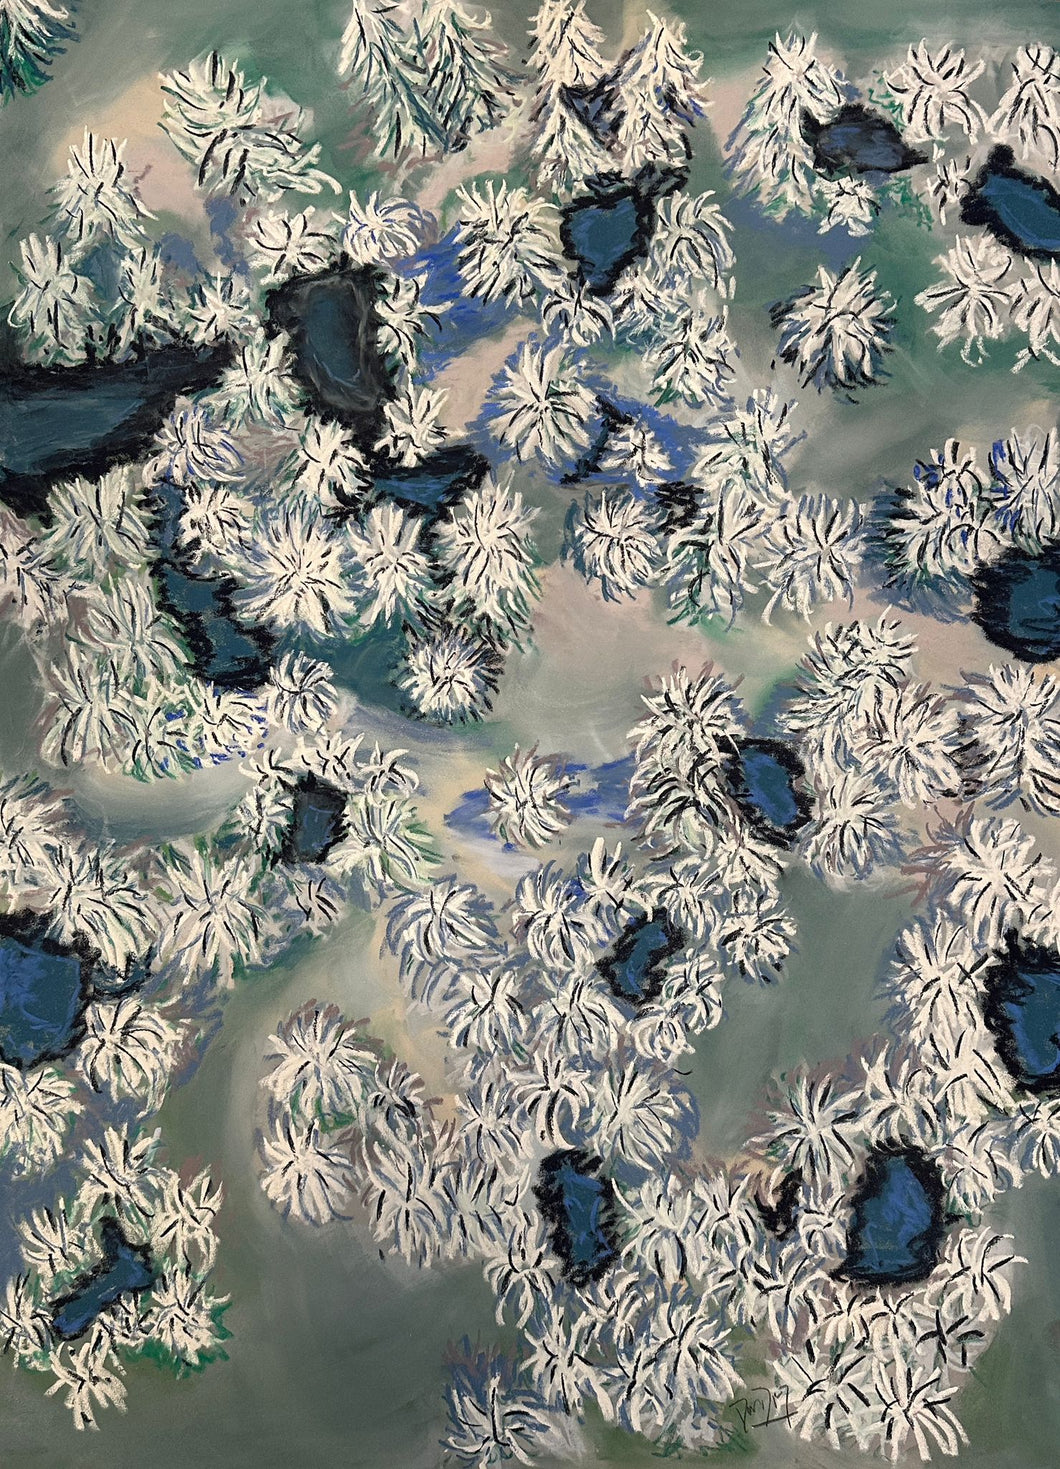 Snowy Pine Trees Seen from Above Painting